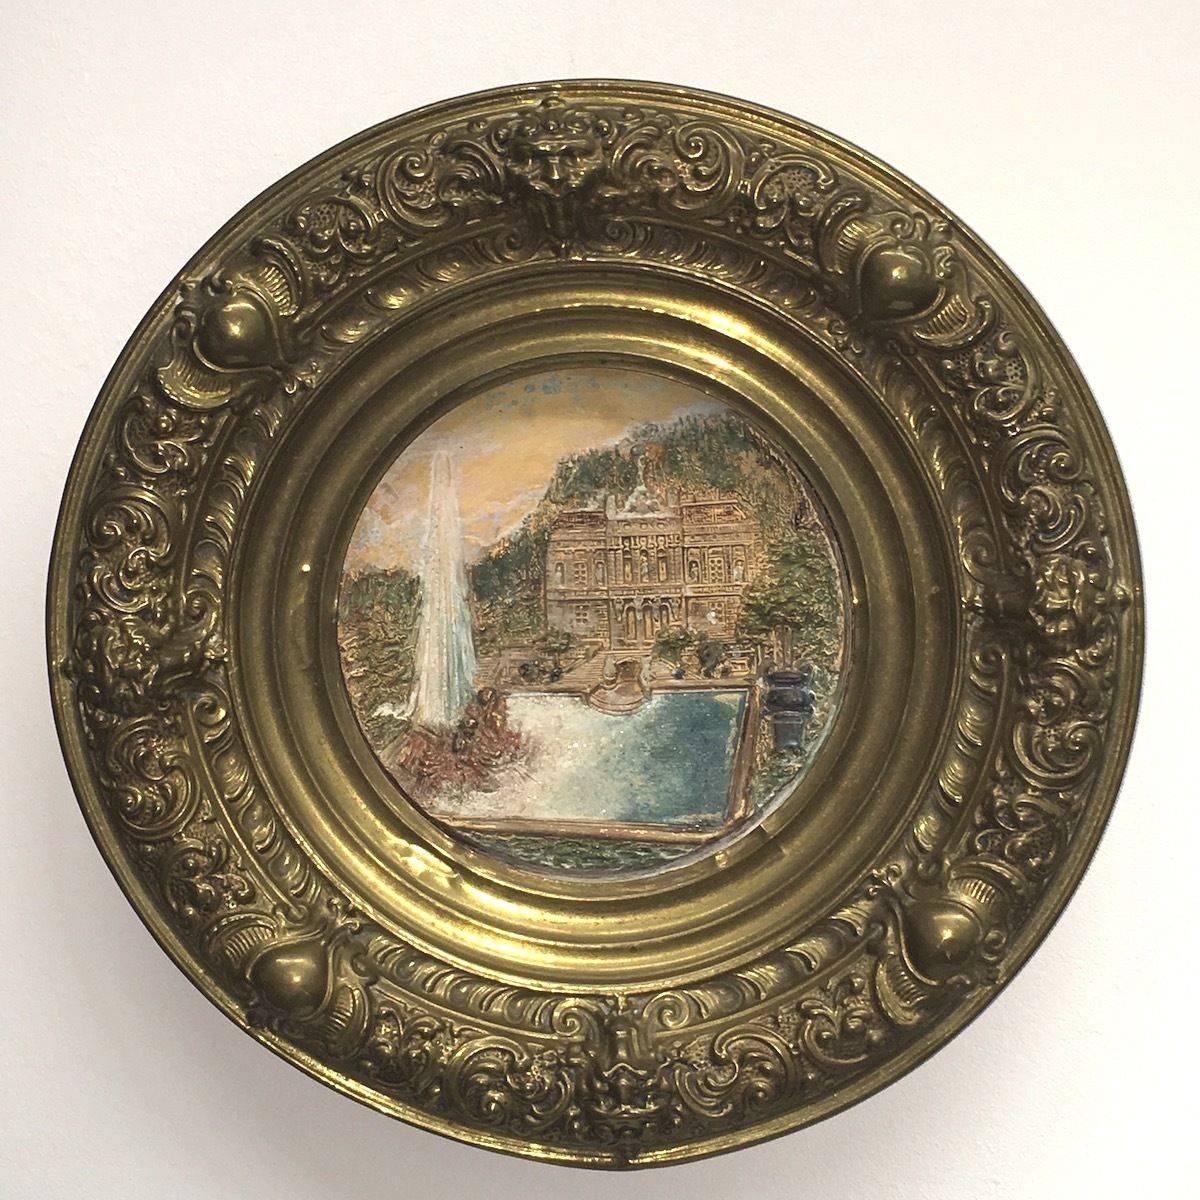 A large German faience plate framed by brass, circa 1880. The faience plate represent castle Linderhof in a landscape. The brass is entirely decorated with flowers, hearts and lions.
Very elegant reflection of the era  and a lovely display of King